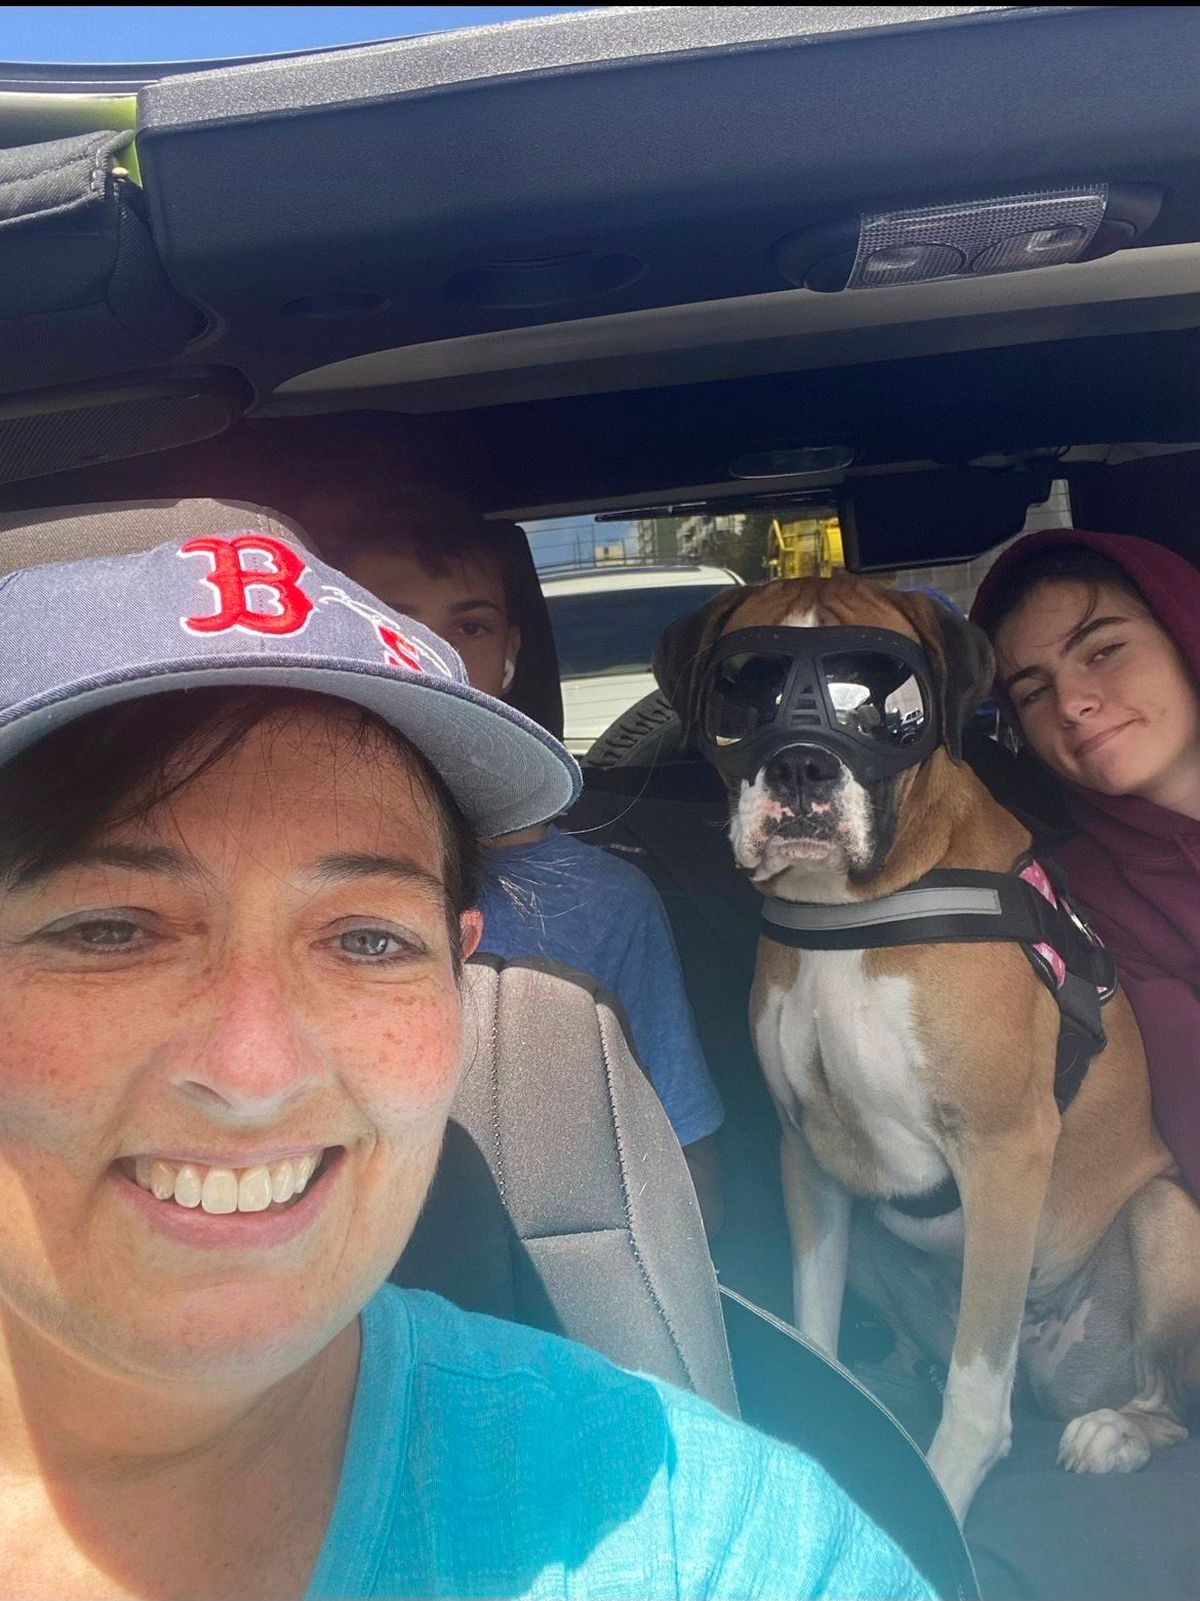 This 2021 photo provided by Cheri Burness shows Burness and her family, including dog Lilikoi, in car in Honolulu. Hundreds of military families living near Pearl Harbor have complained of stomach pain, nausea and other health ailments amid concerns the Navy